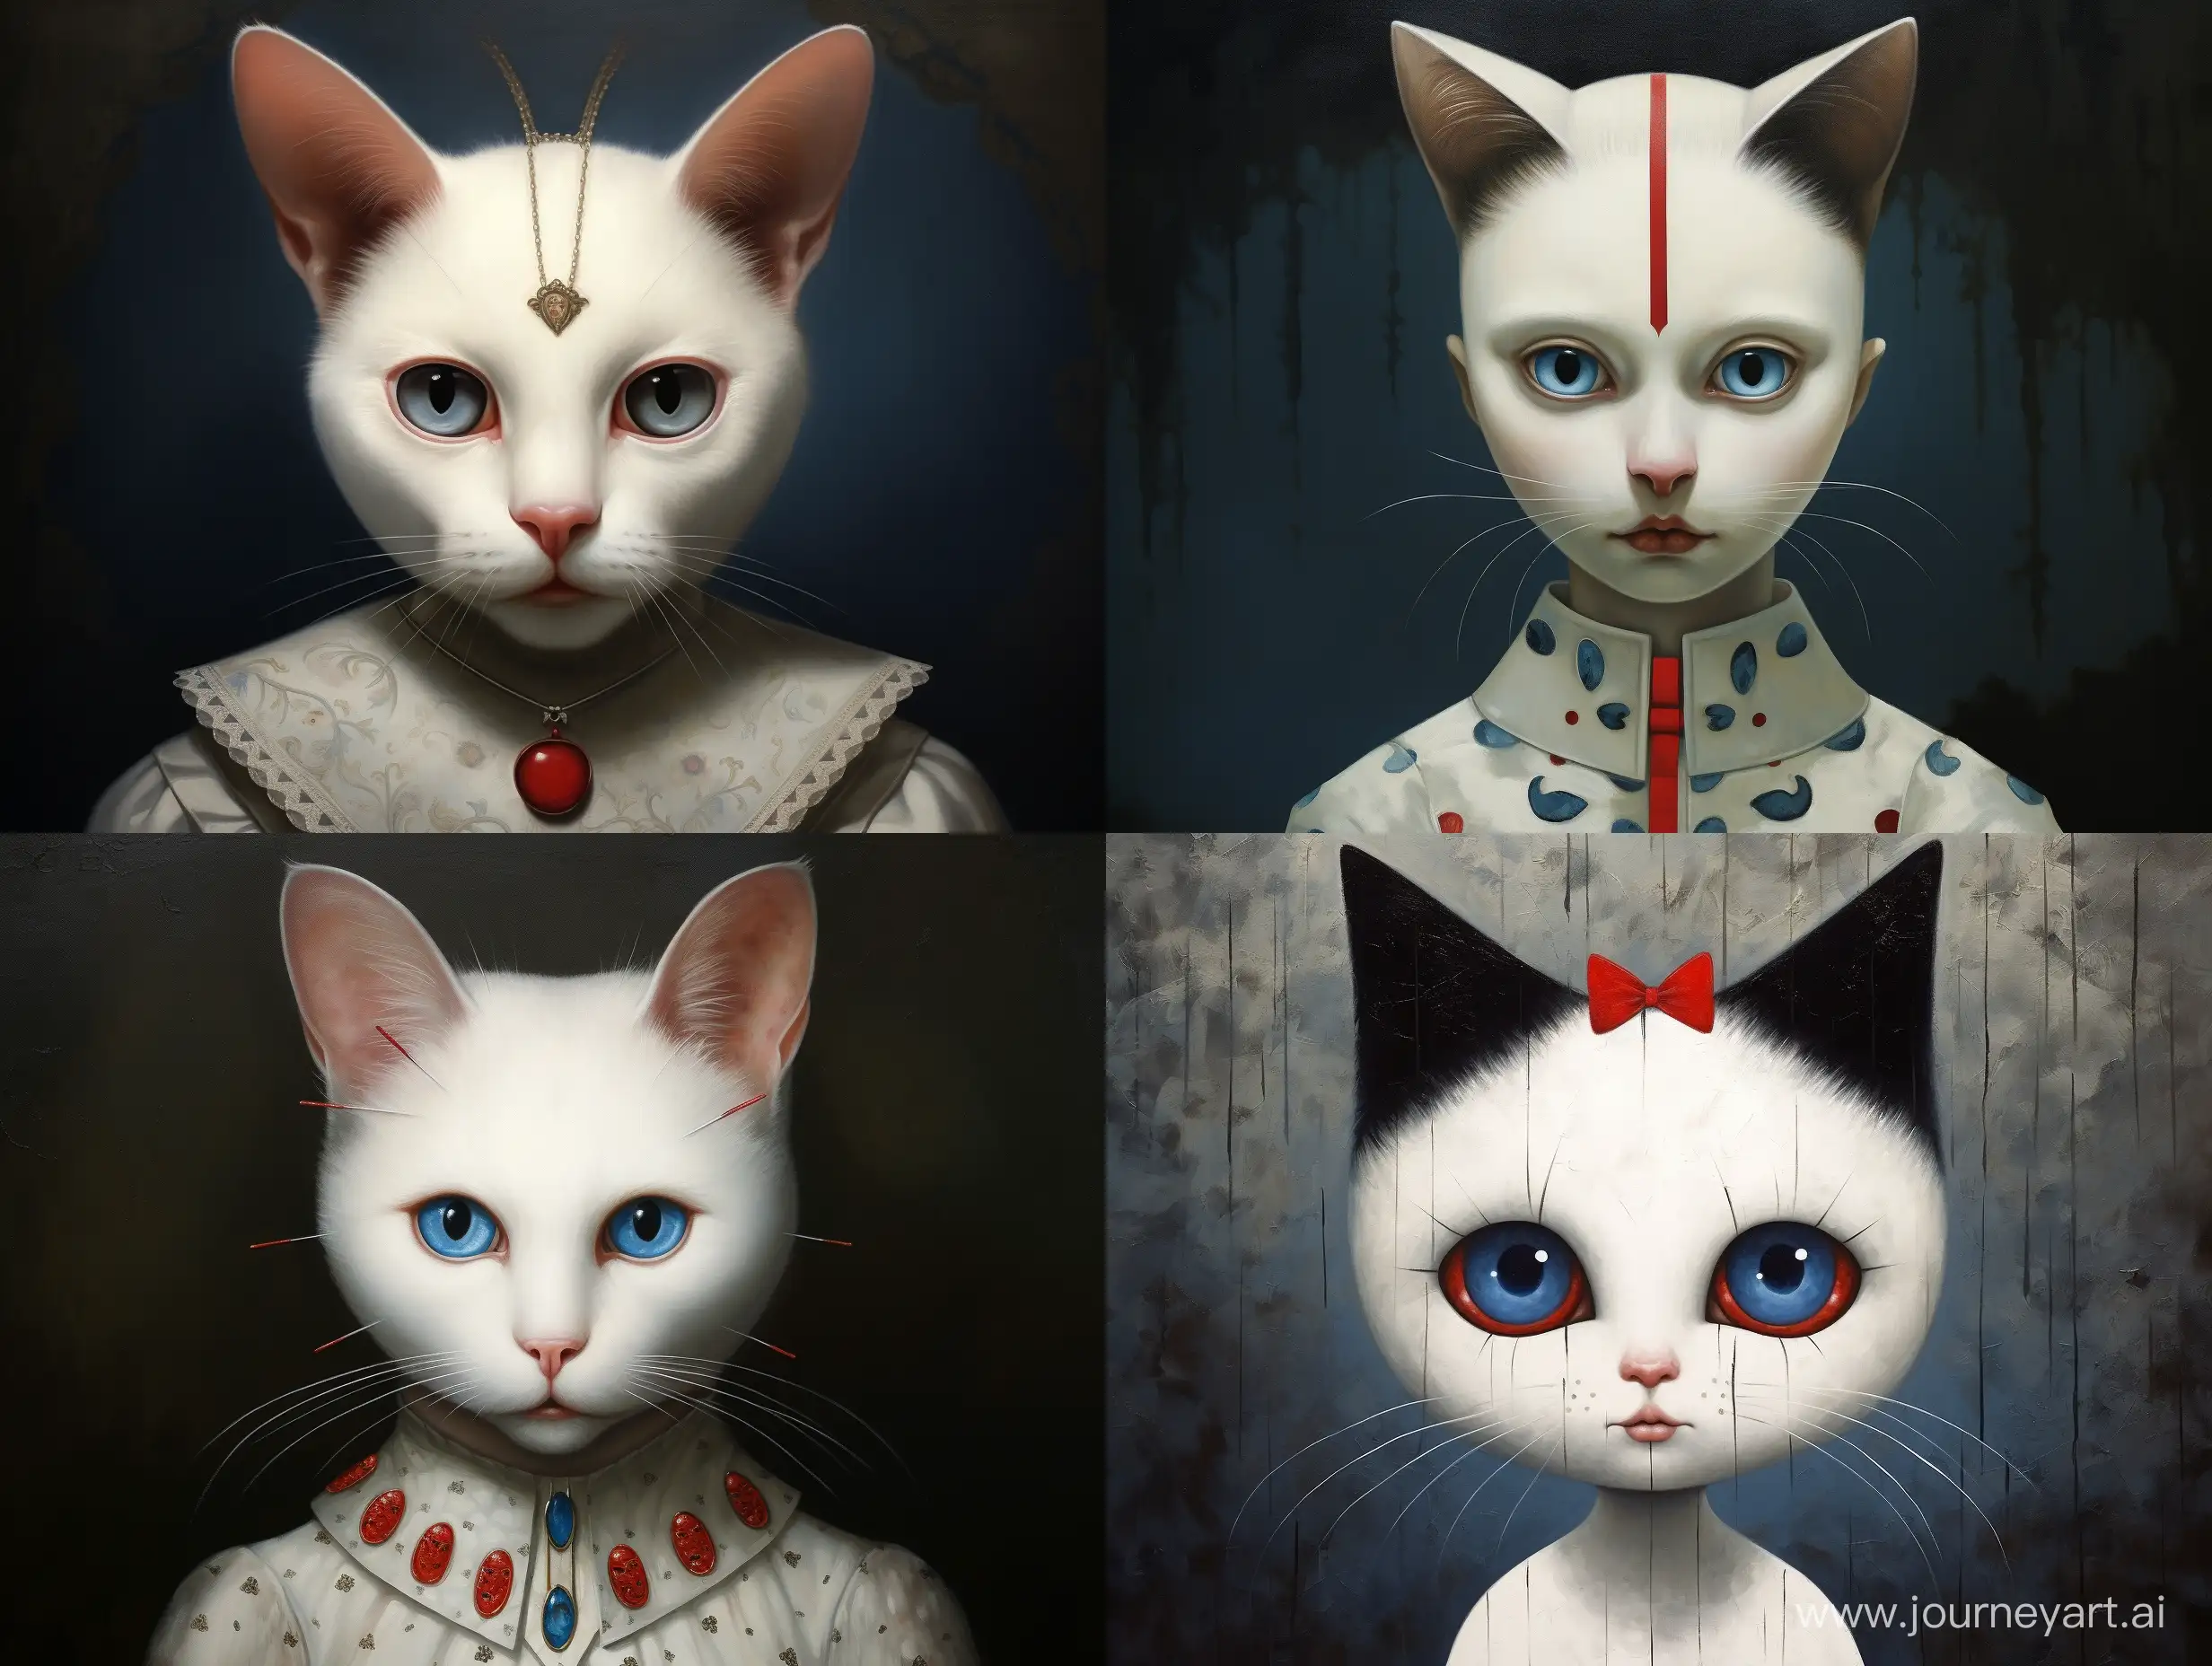 Majestic-SnowWhite-Cat-with-CrossShaped-Spot-and-Enchanting-Blue-Eyes